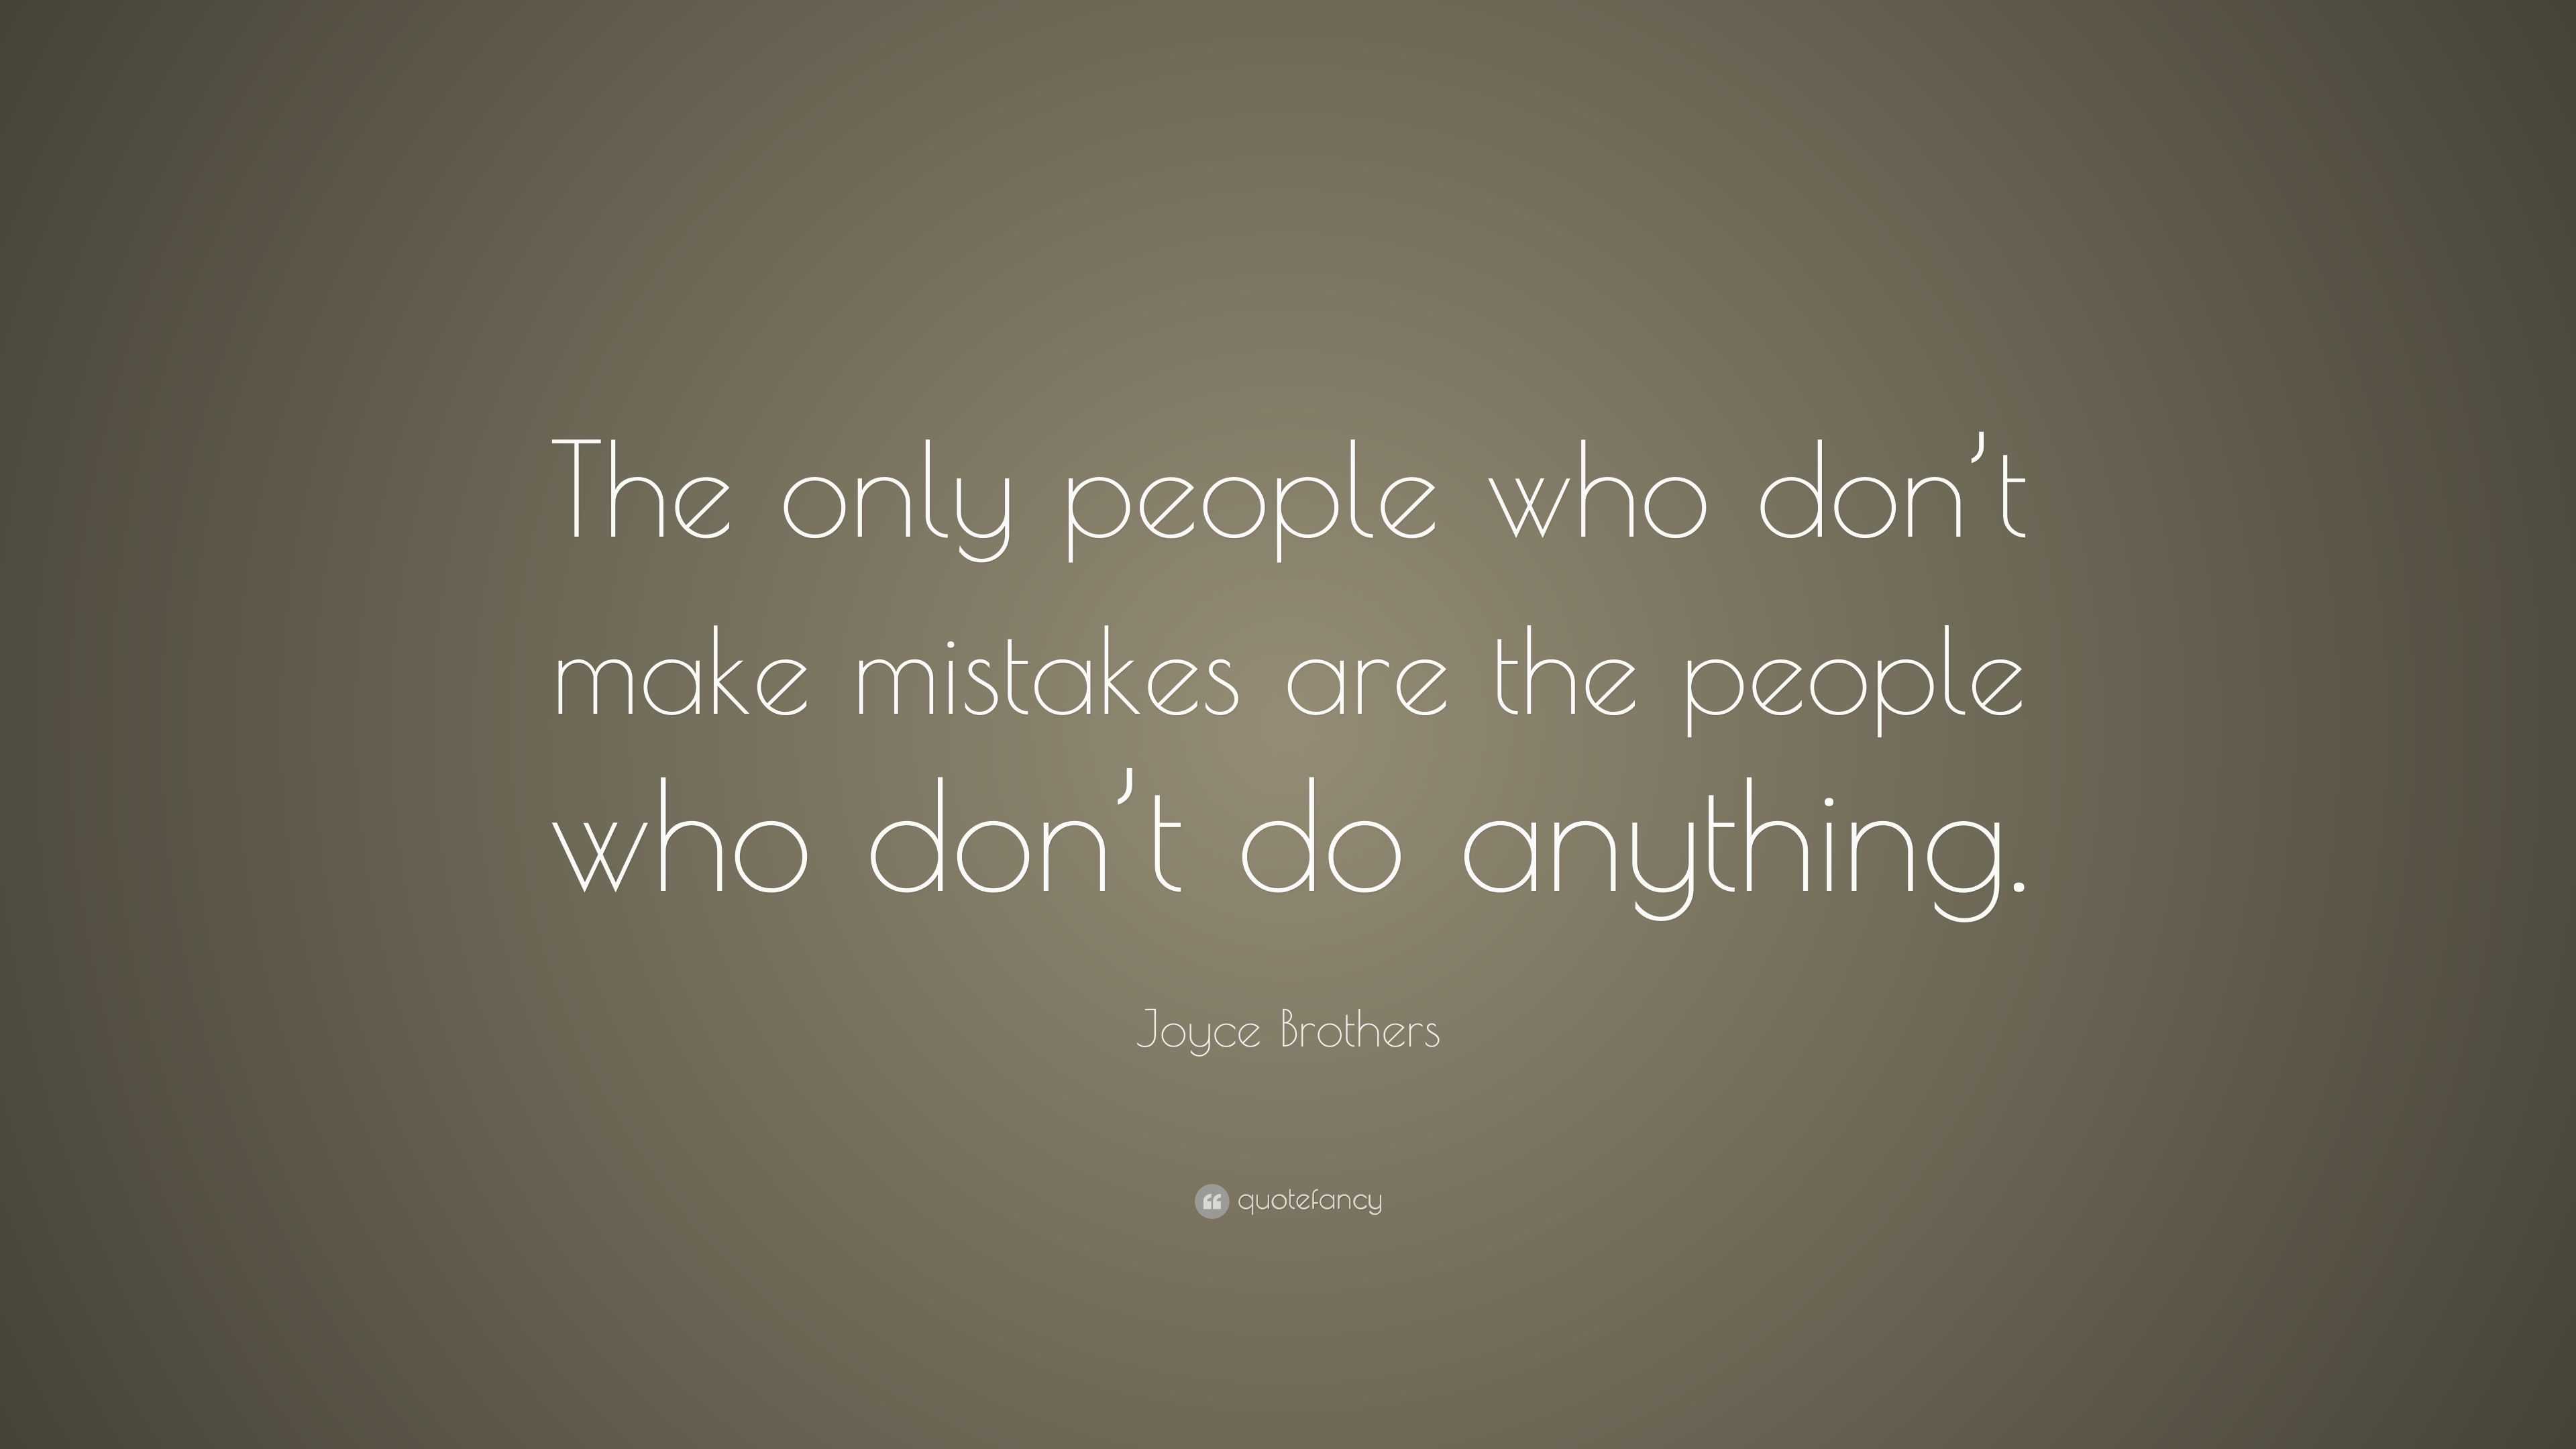 Joyce Brothers Quote: “The only people who don’t make mistakes are the ...